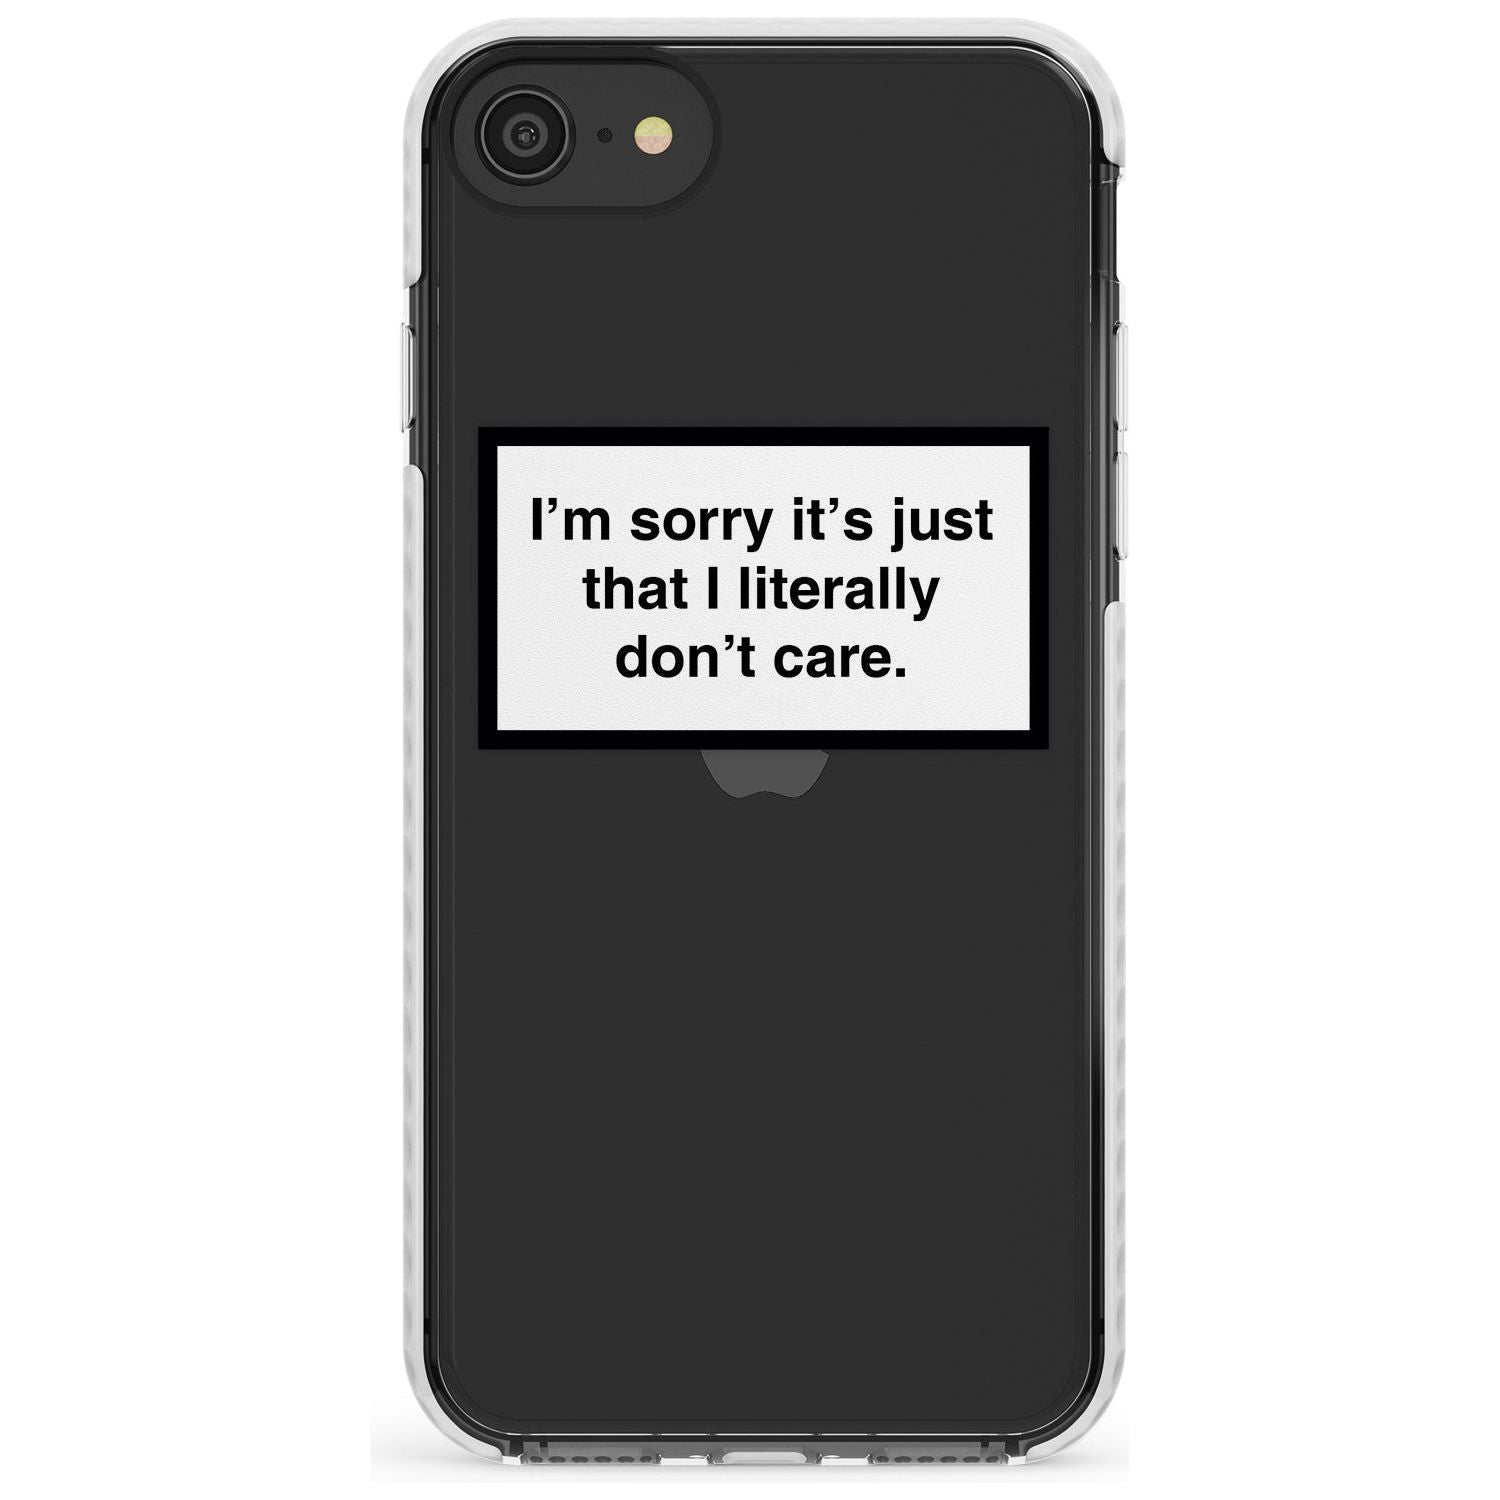 I'm sorry it's just that I literally don't care Slim TPU Phone Case for iPhone SE 8 7 Plus